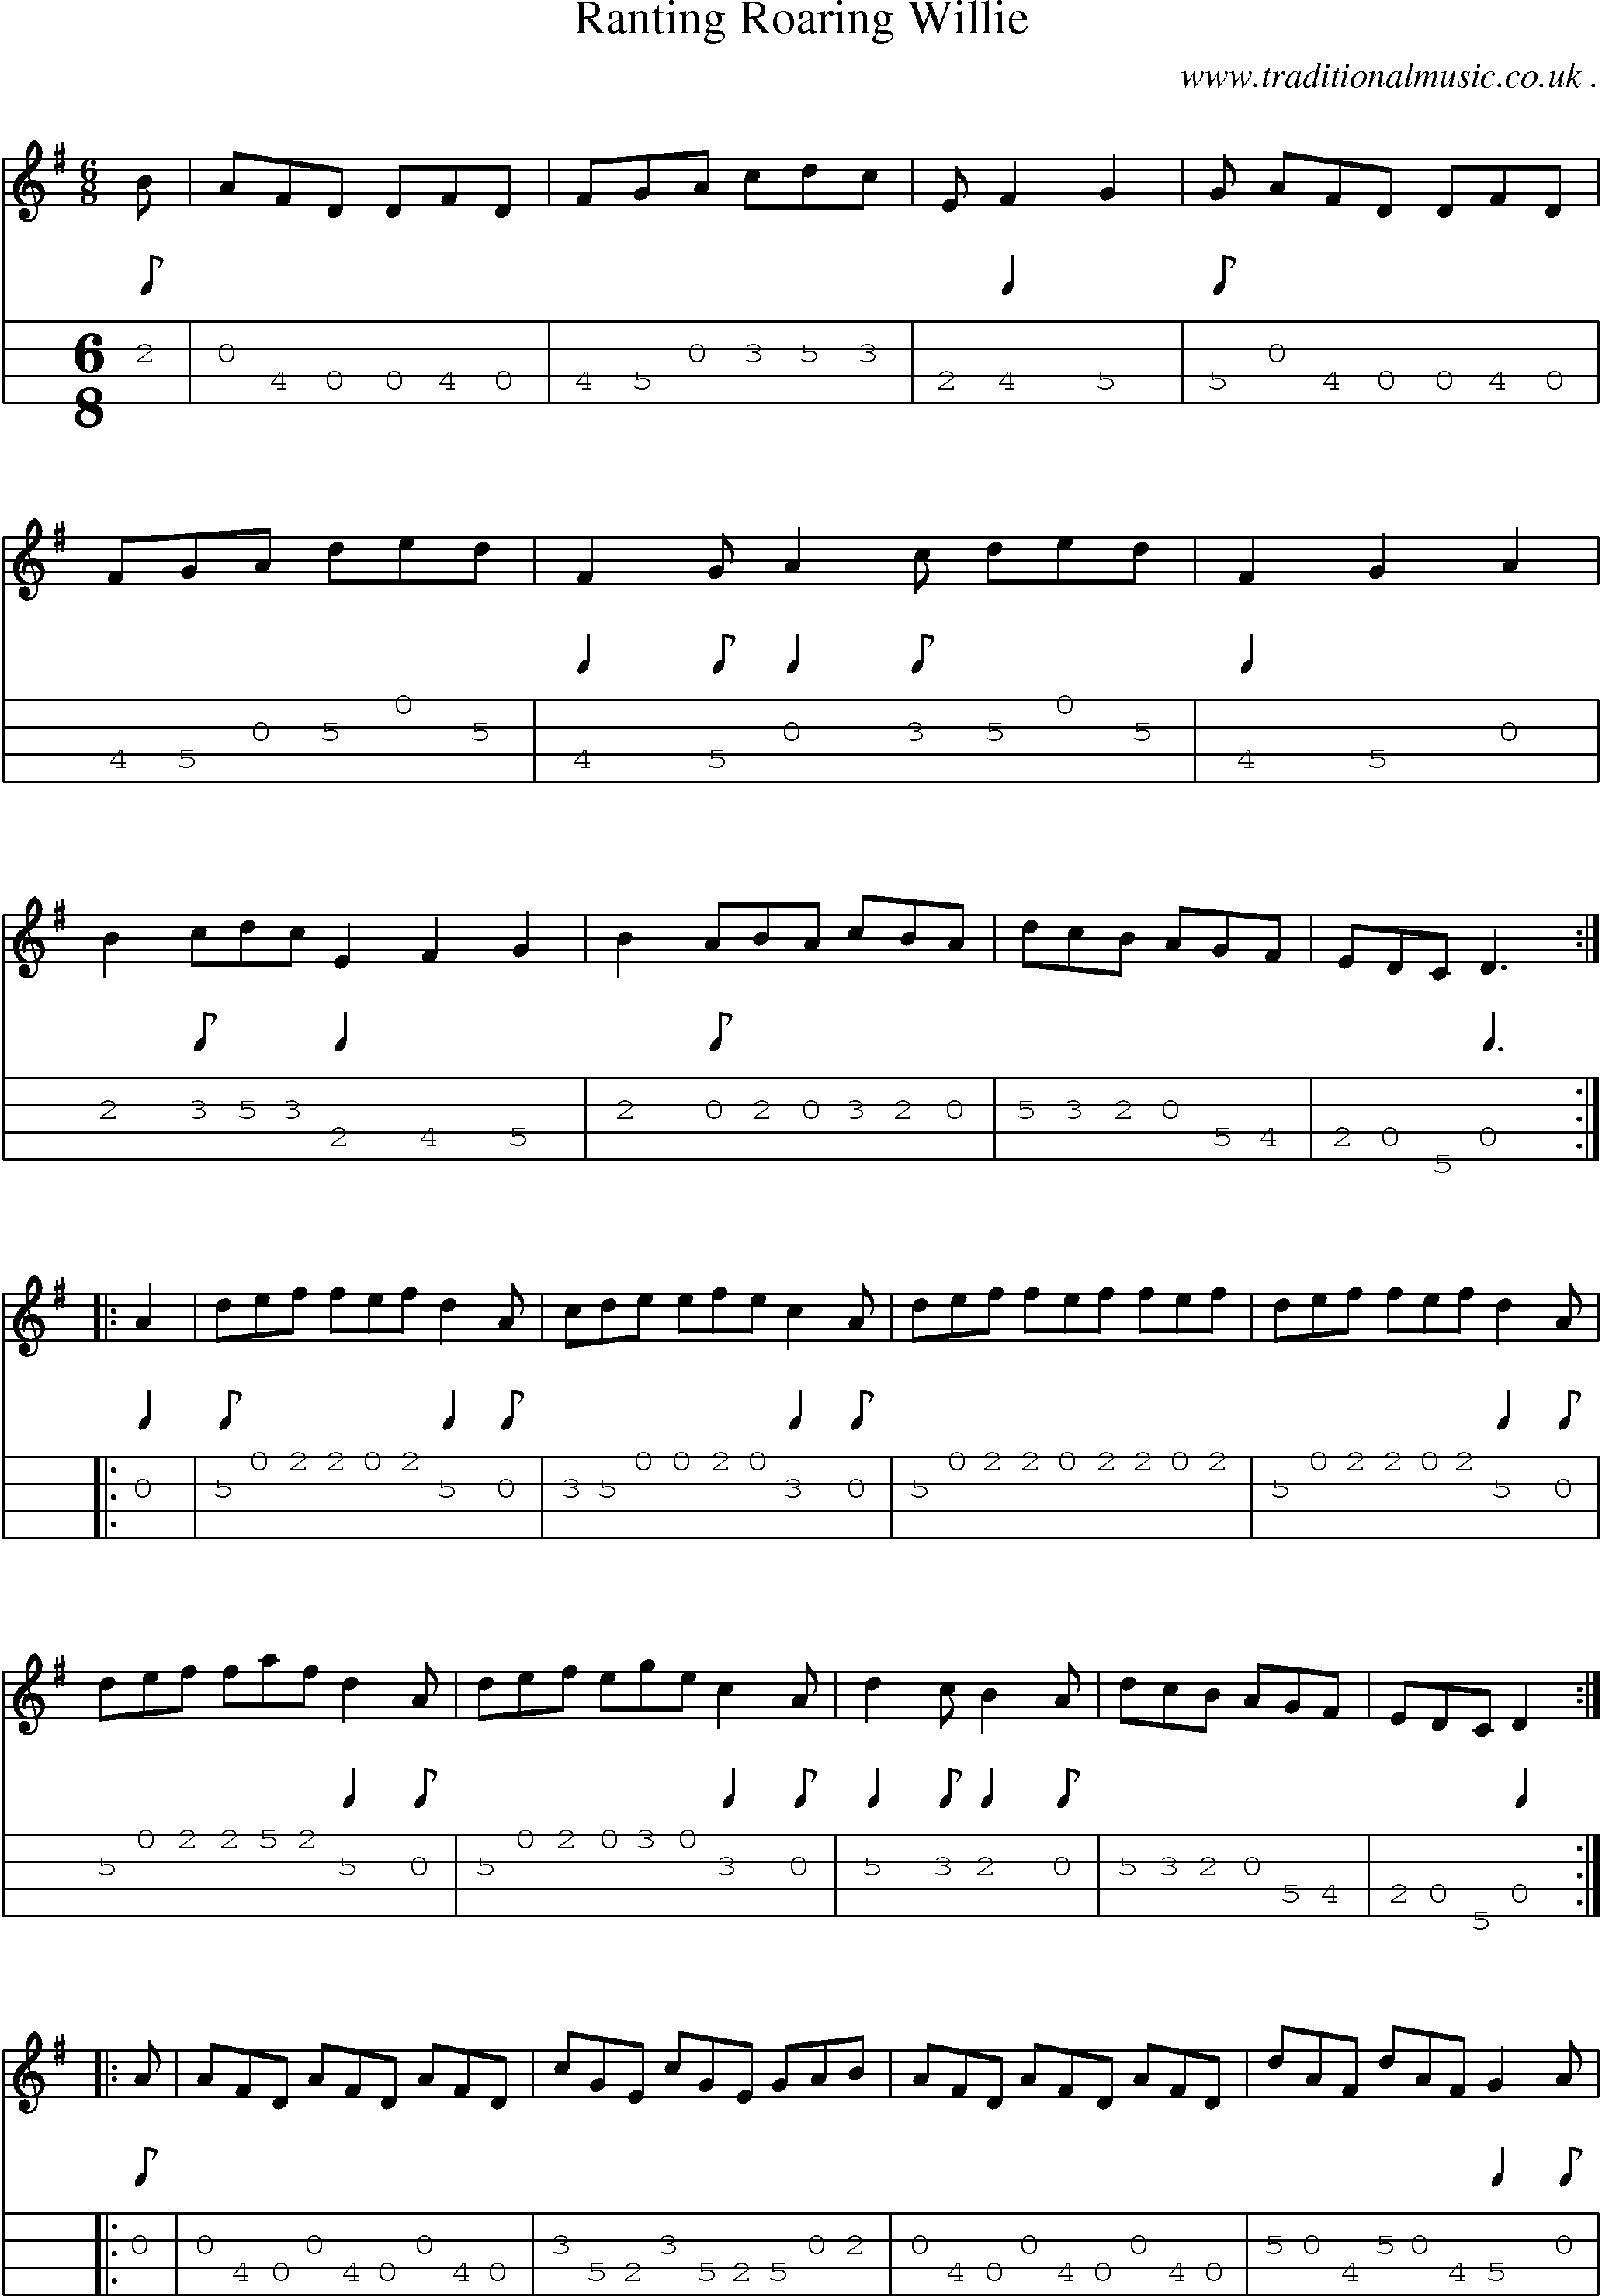 Sheet-Music and Mandolin Tabs for Ranting Roaring Willie